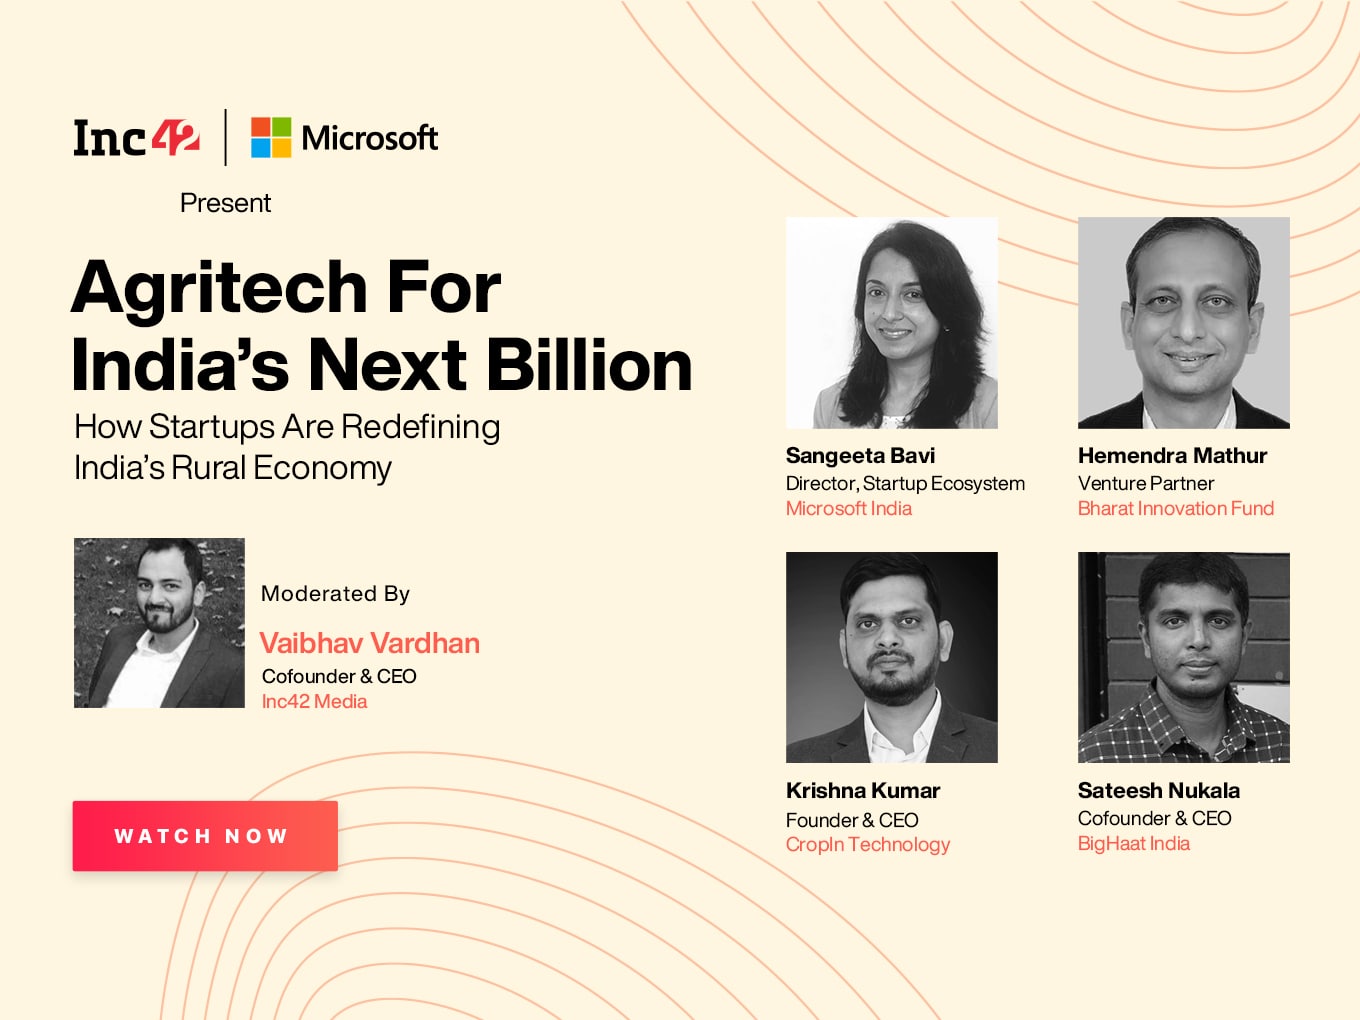 The Dialogue | How Startups Are Redefining India’s Rural Economy